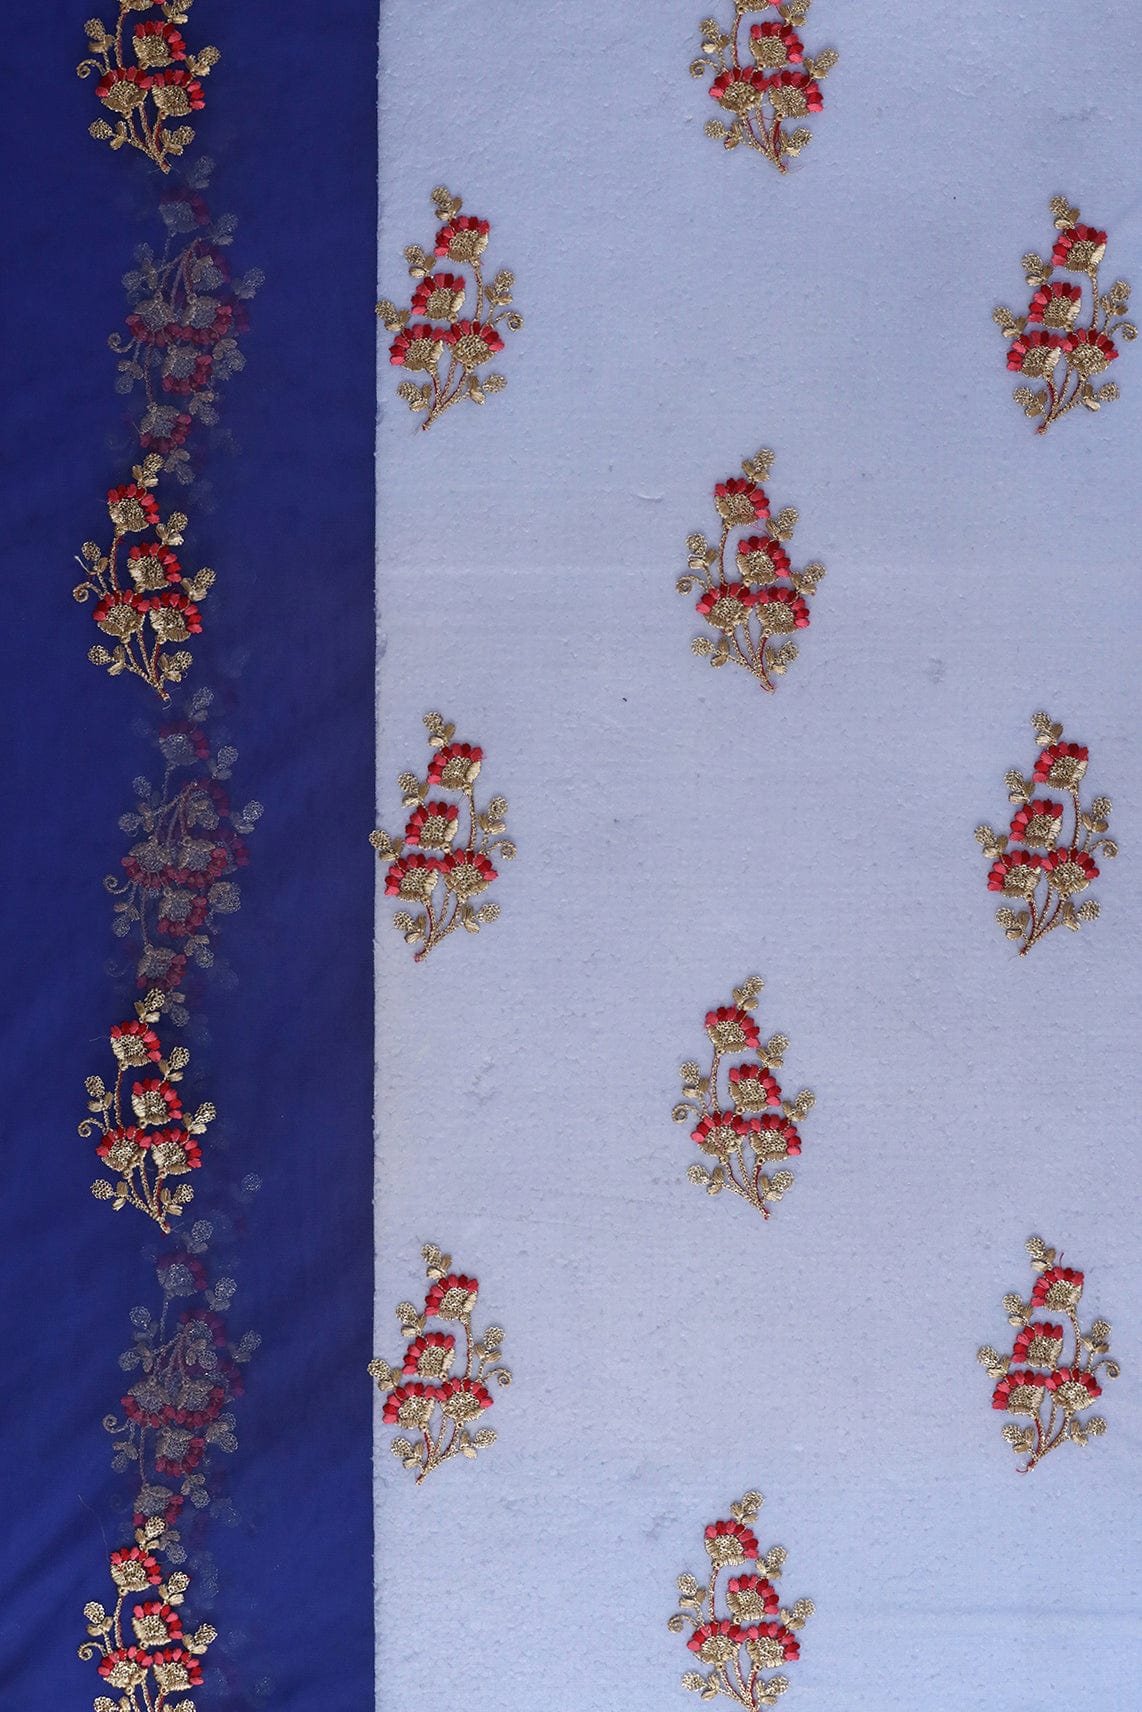 doeraa Embroidery Fabrics Red And Pink Thread Gold Zari With Sequins Floral Embroidery Work On Royal Blue Soft Net Fabric